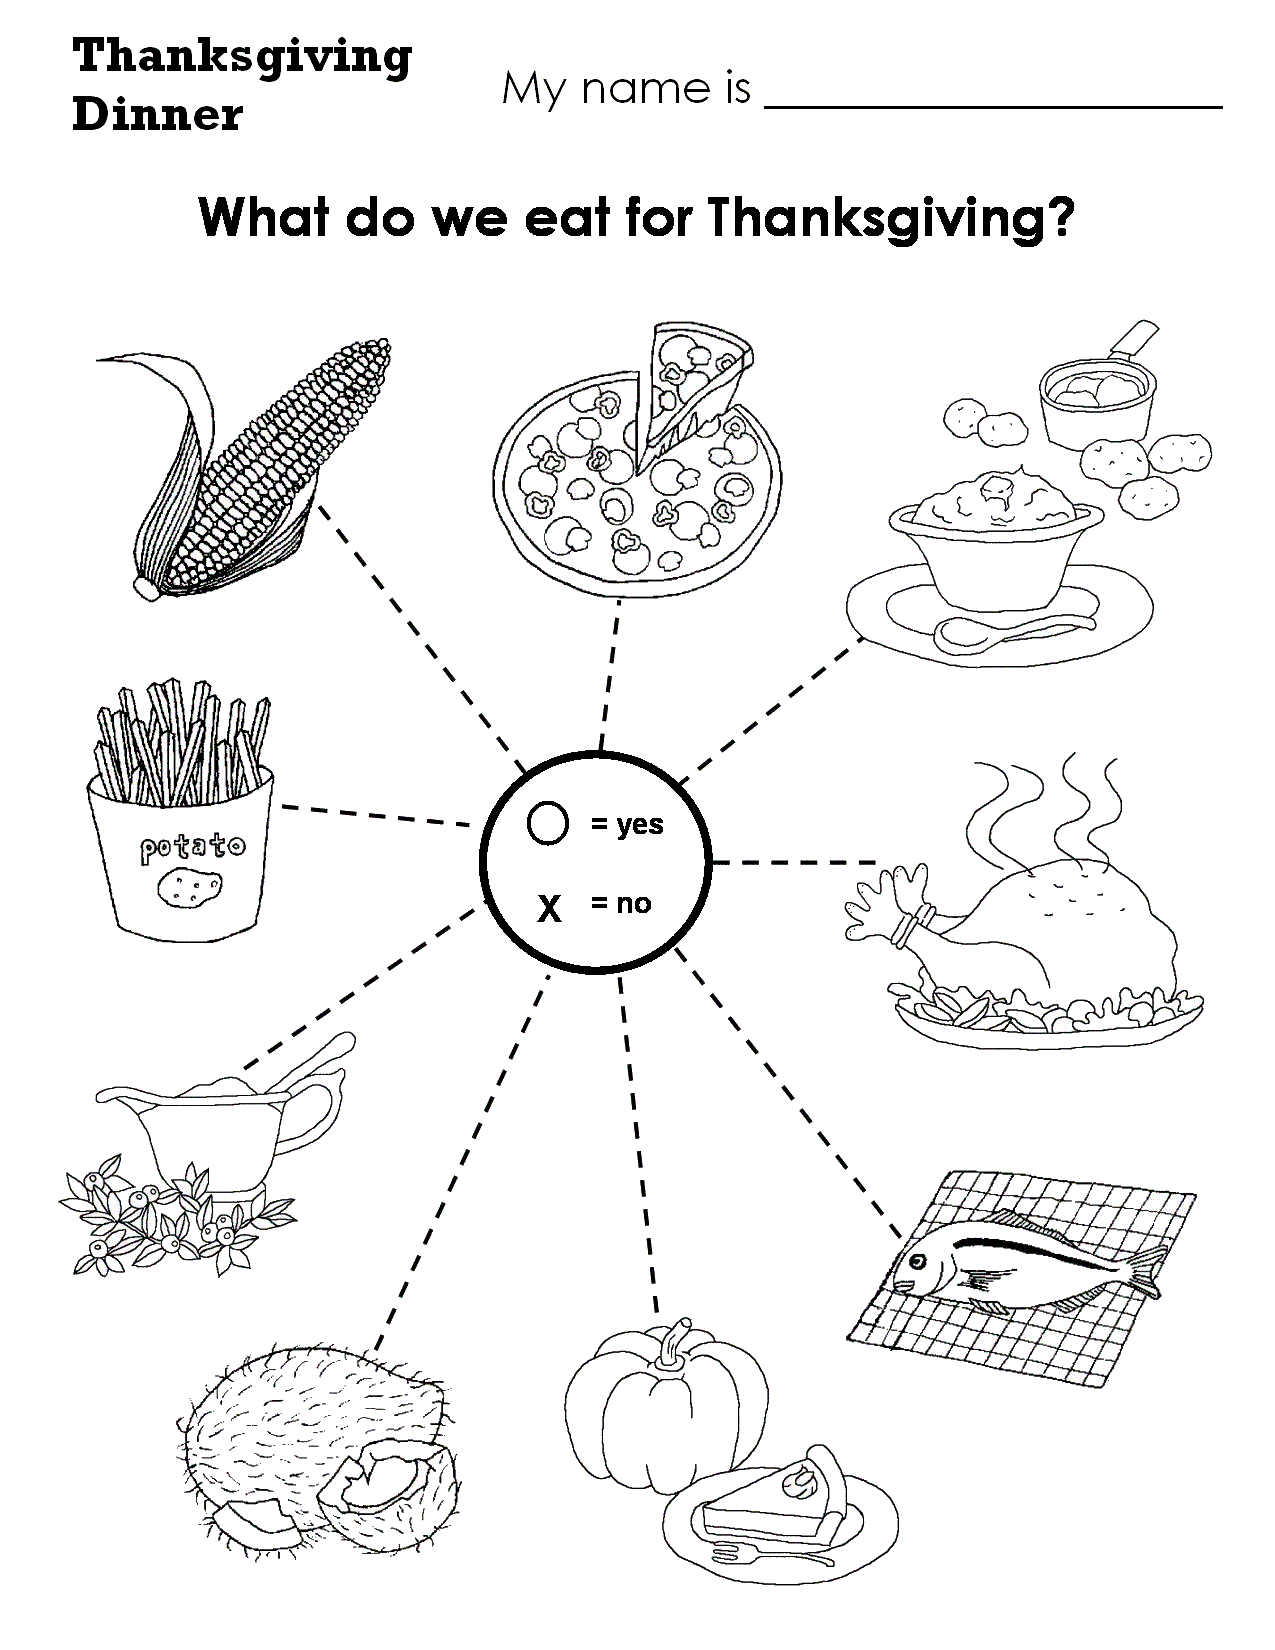 penchant-pictures-thanksgiving-worksheets-pictures